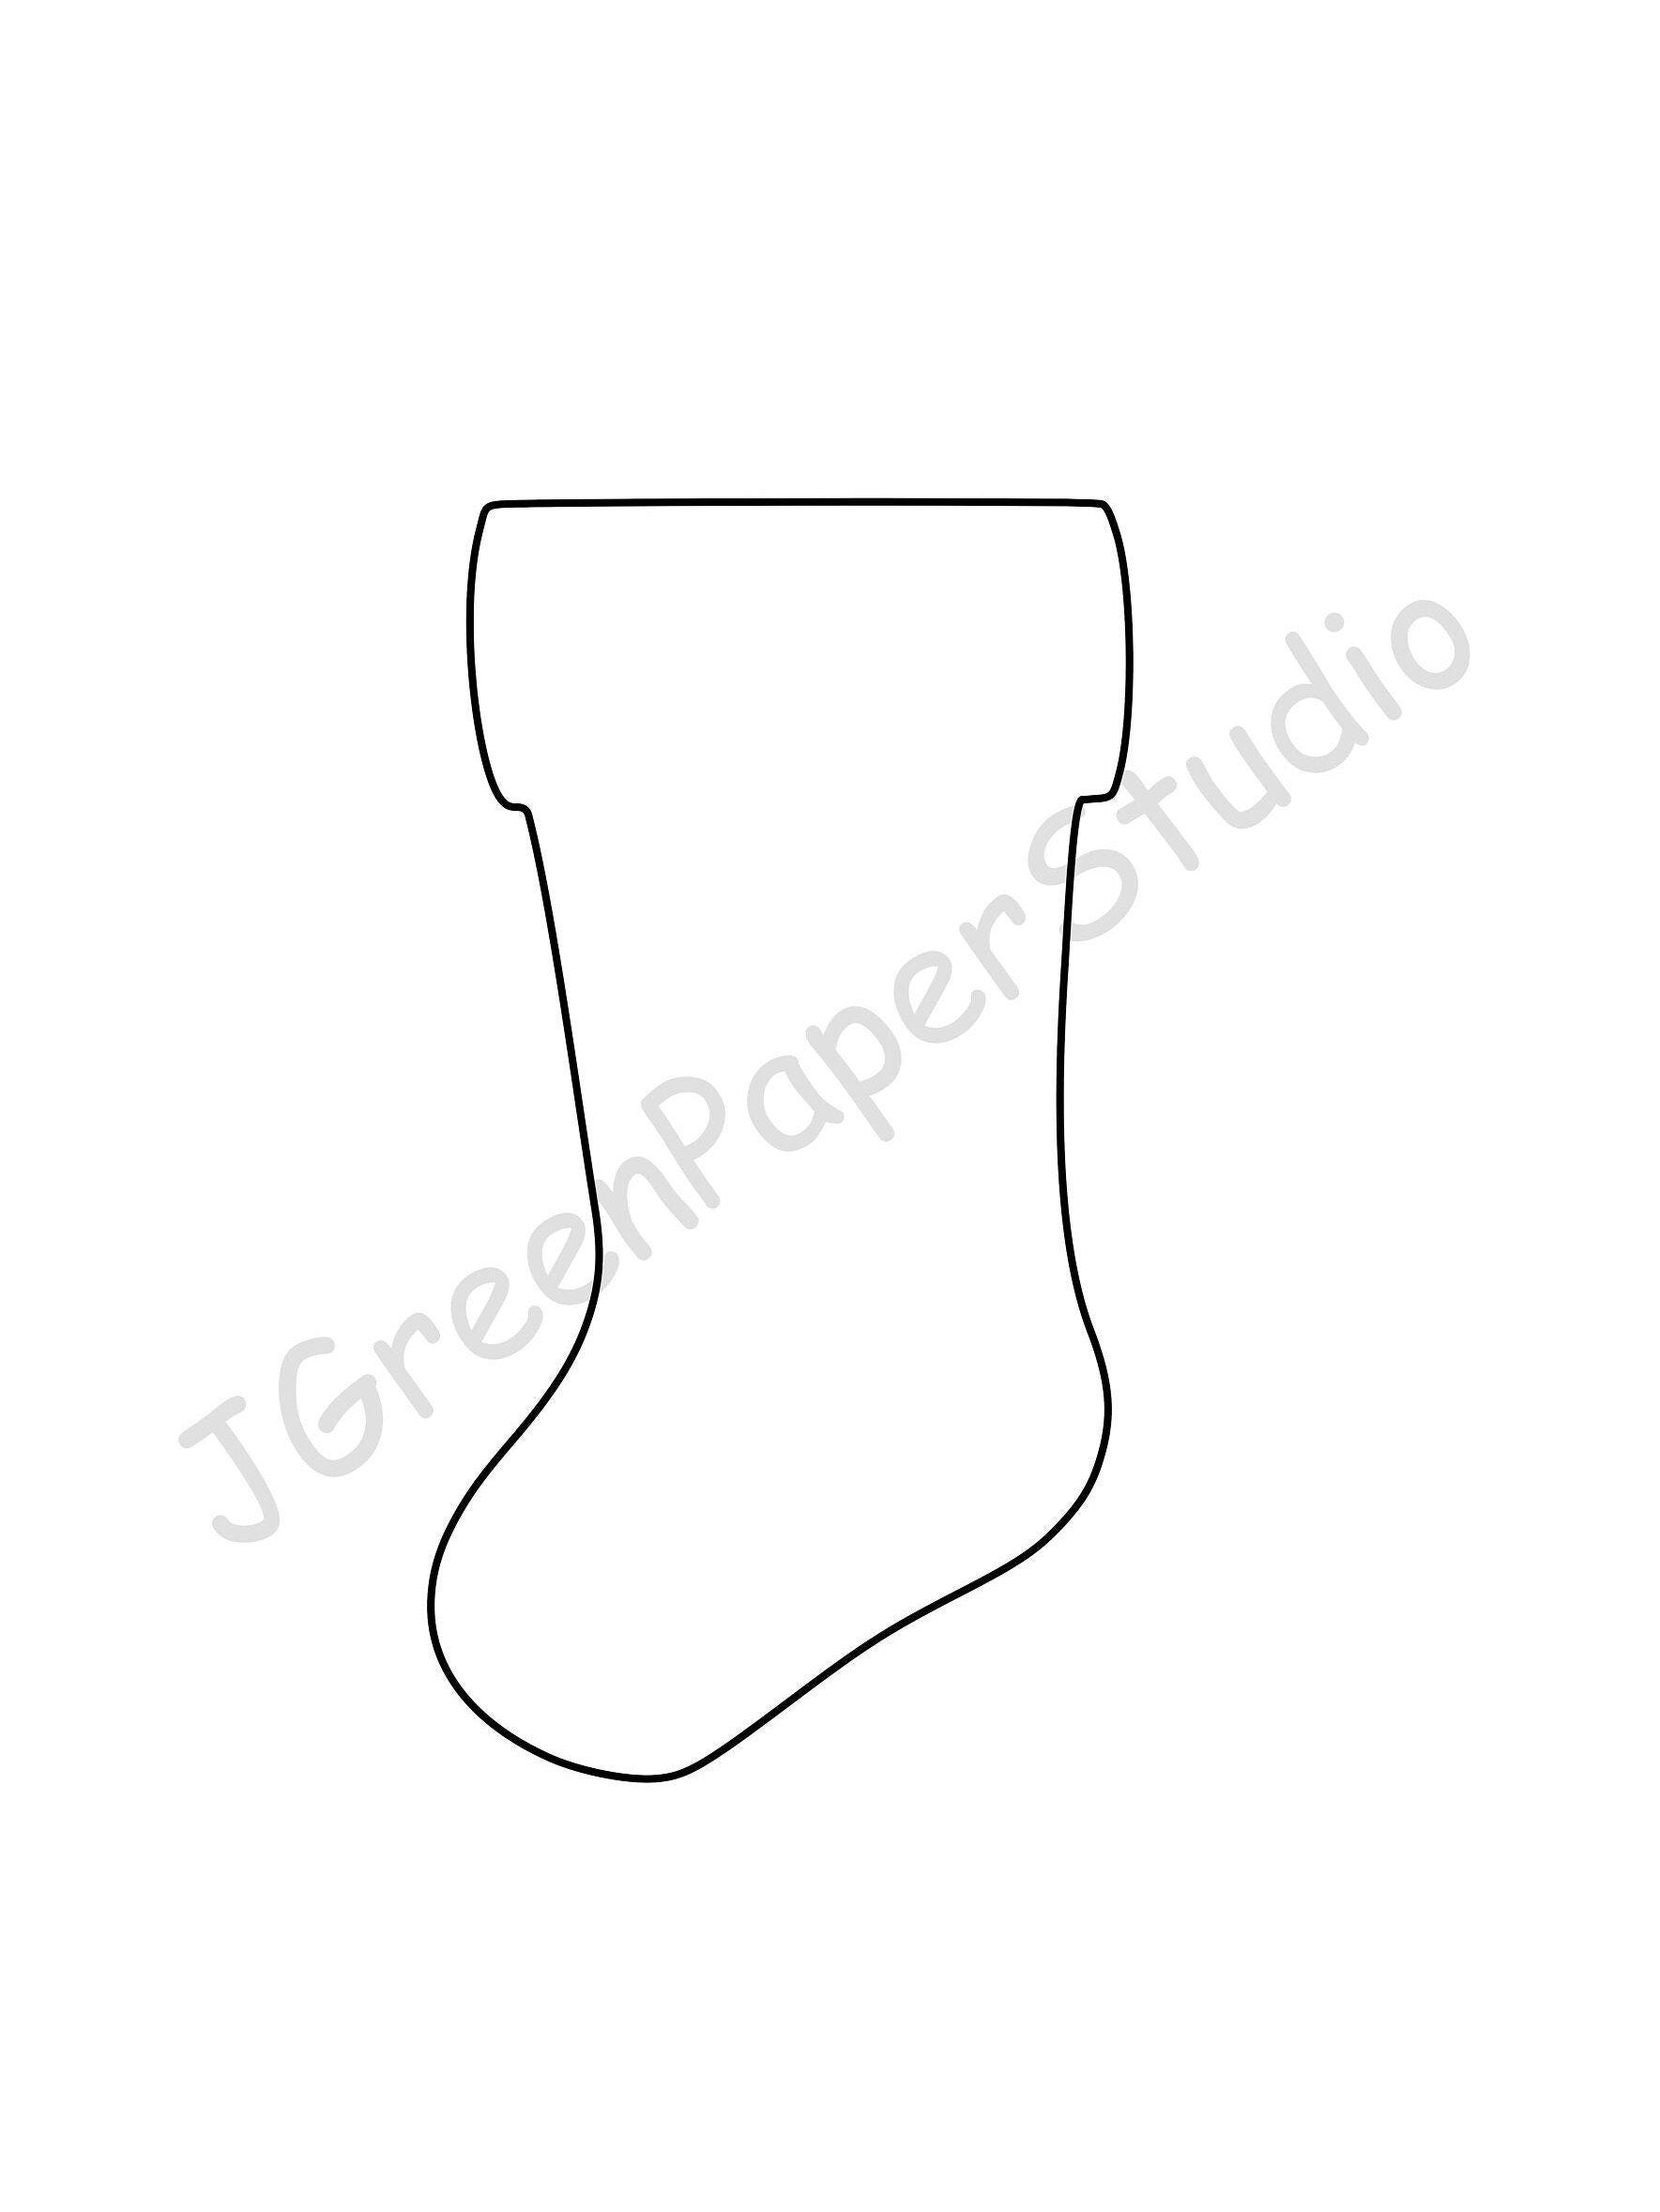 Printable Stocking Template-PDF Digital Download Stocking Kids Holiday Coloring Page Crafts Stencil 7-inch Stocking Christmas Bulletin Board